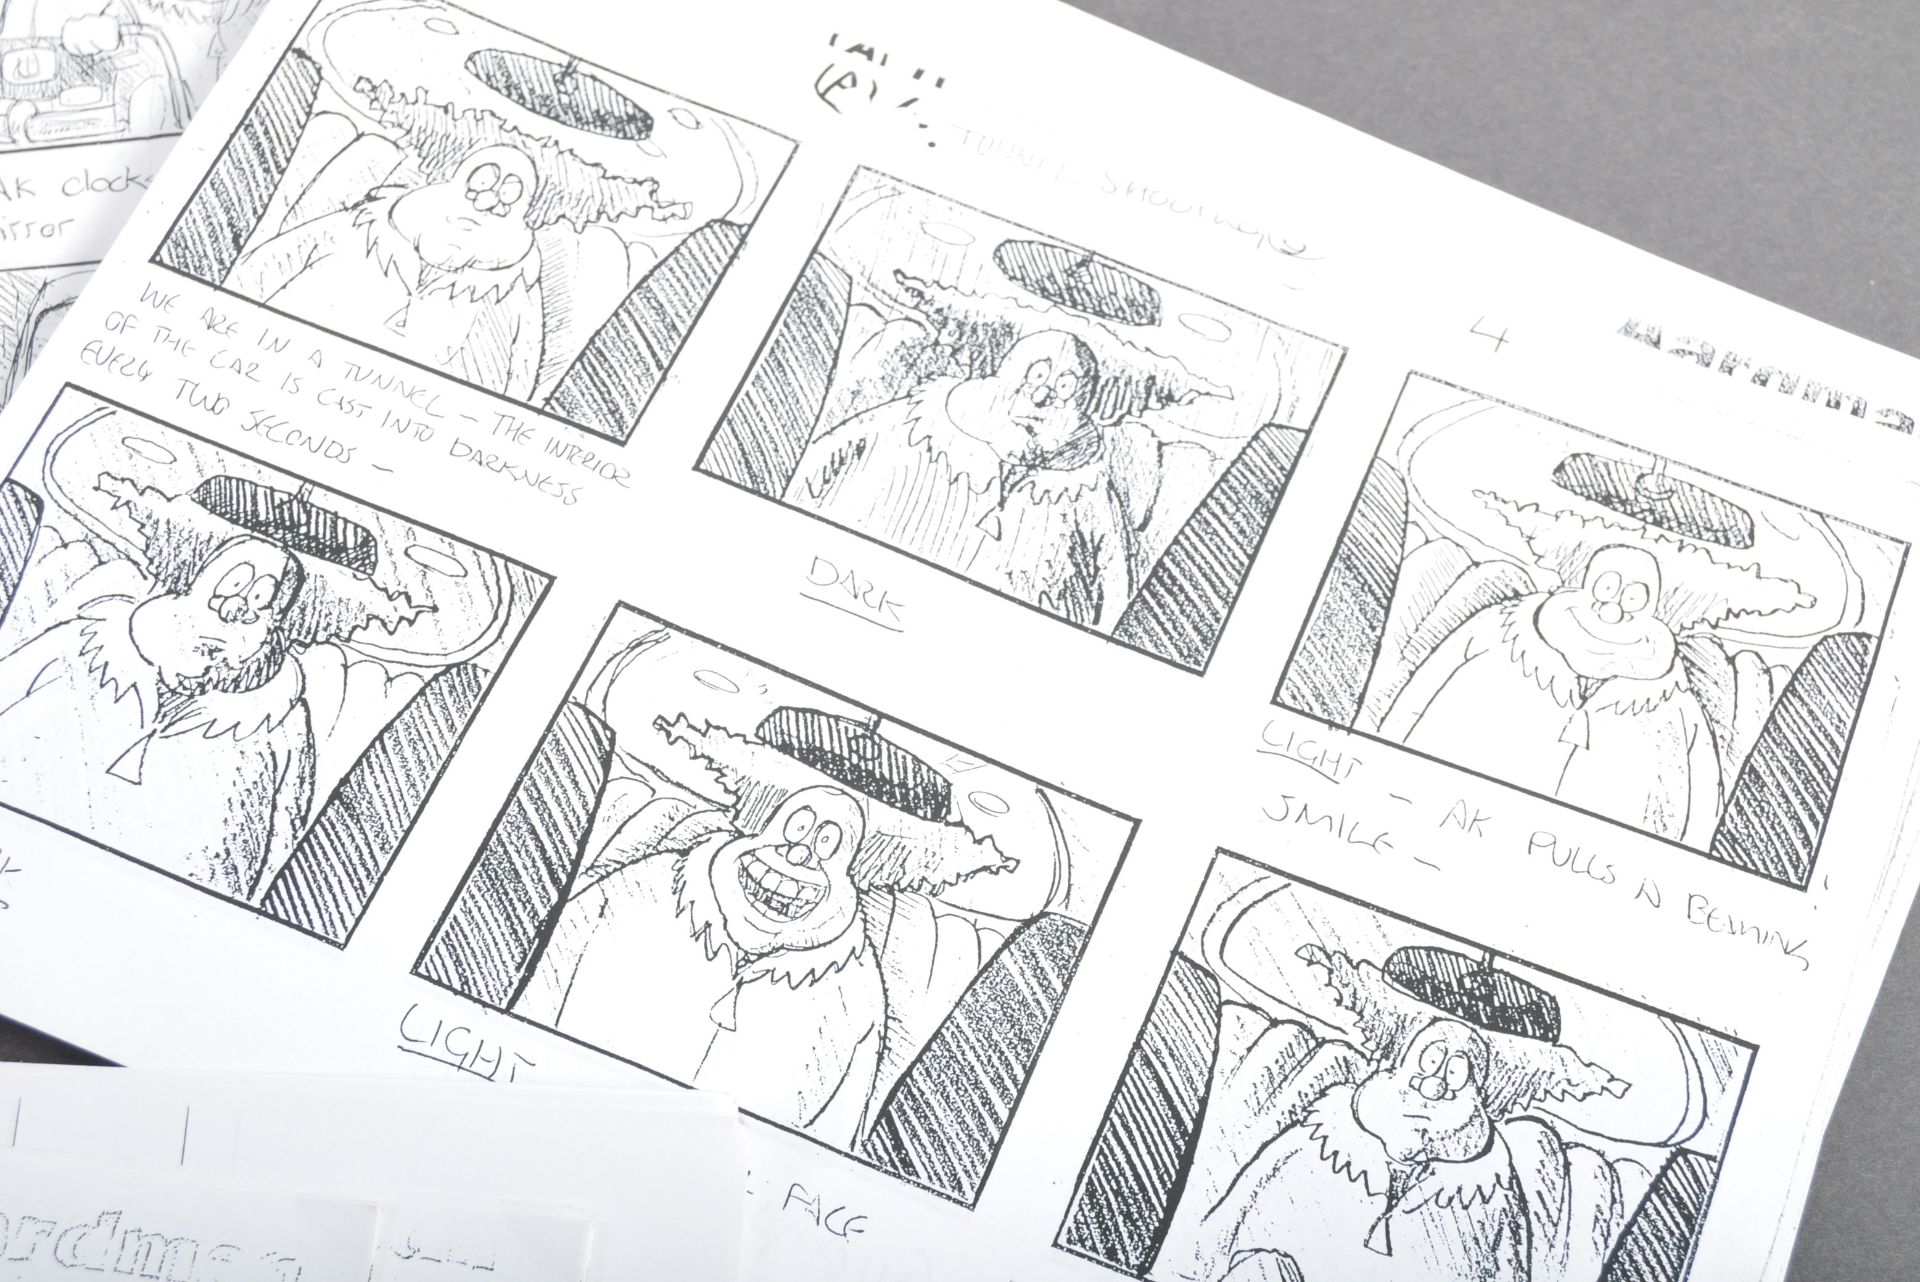 AARDMAN ANIMATIONS - ANGRY KID (1999) - PRODUCTION STORYBOARDS - Image 4 of 7